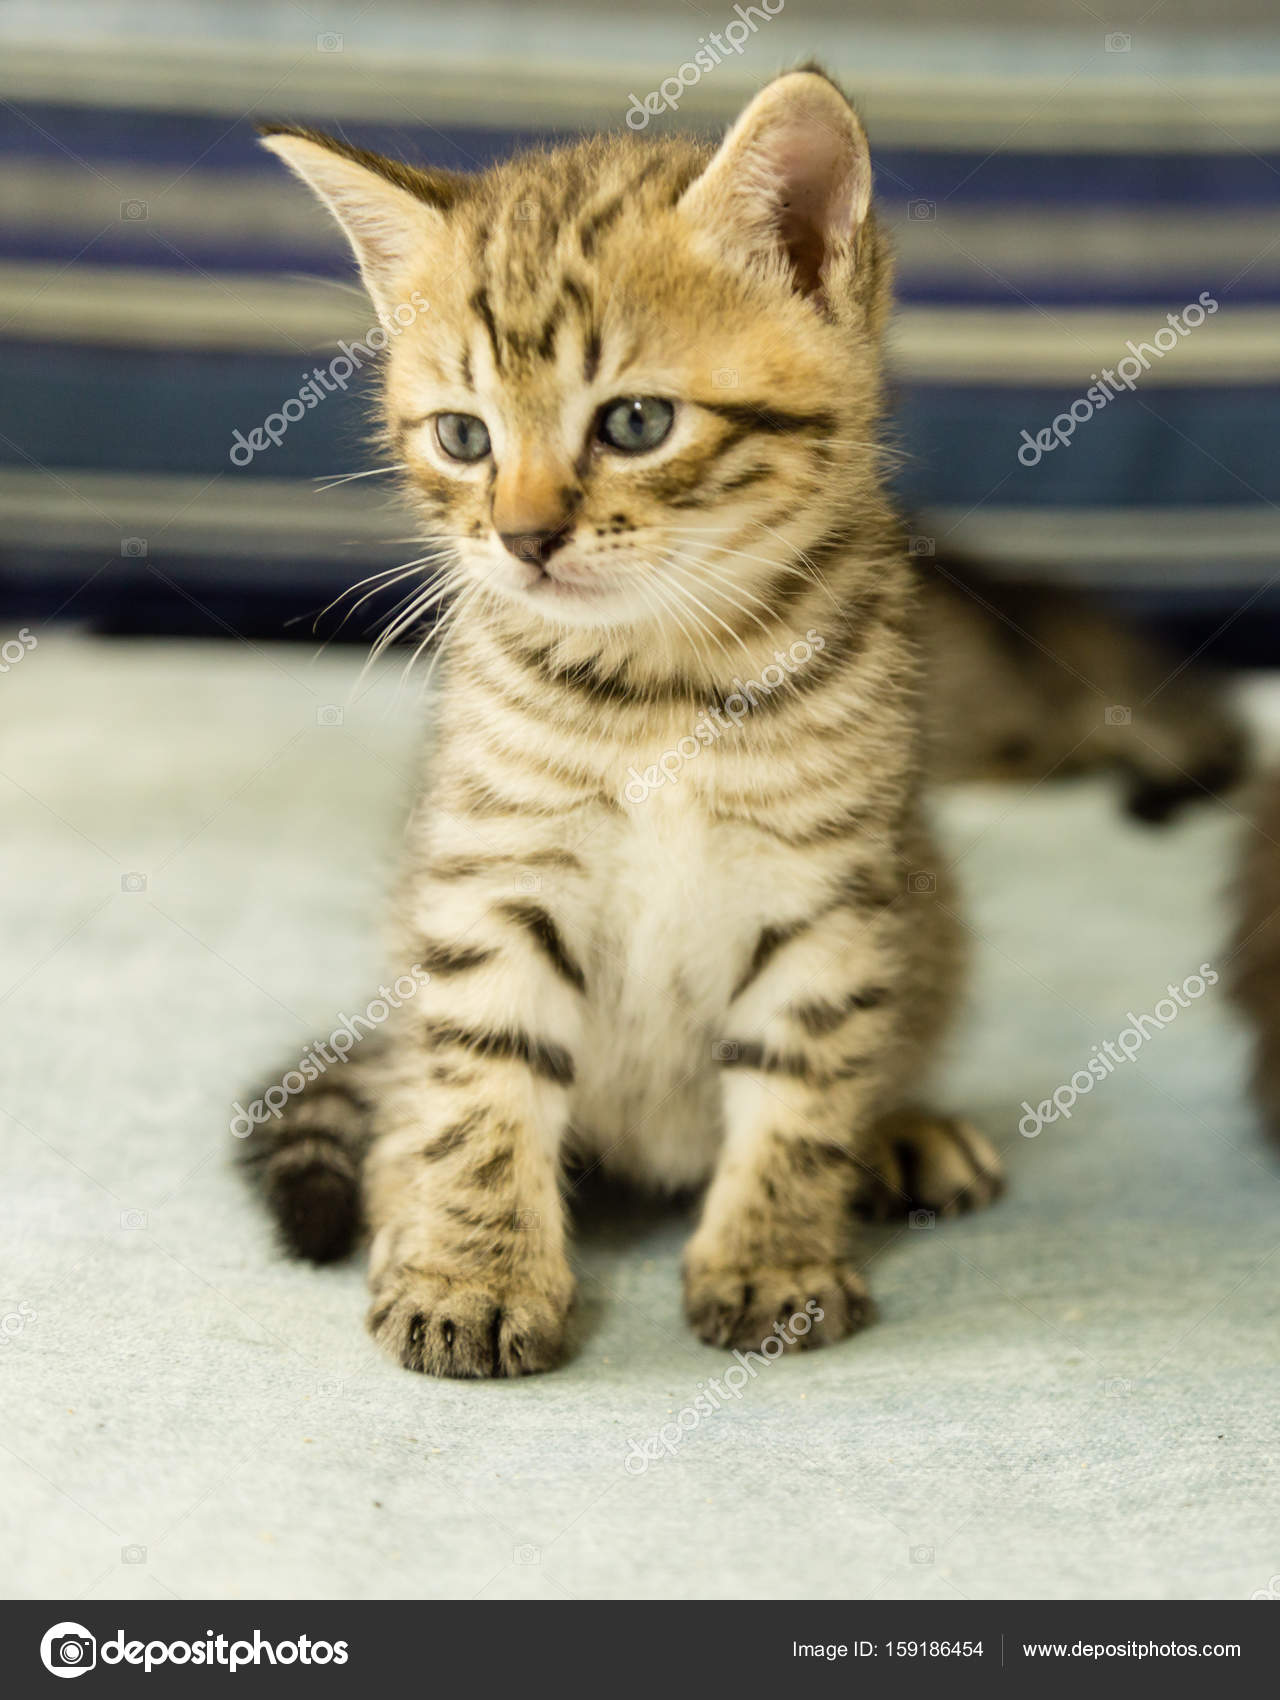 Shinkan onwetendheid Industrialiseren Kitten and tiger | Kitten with tiger stripes on blue couch — Stock Photo ©  imagesbykenny #159186454